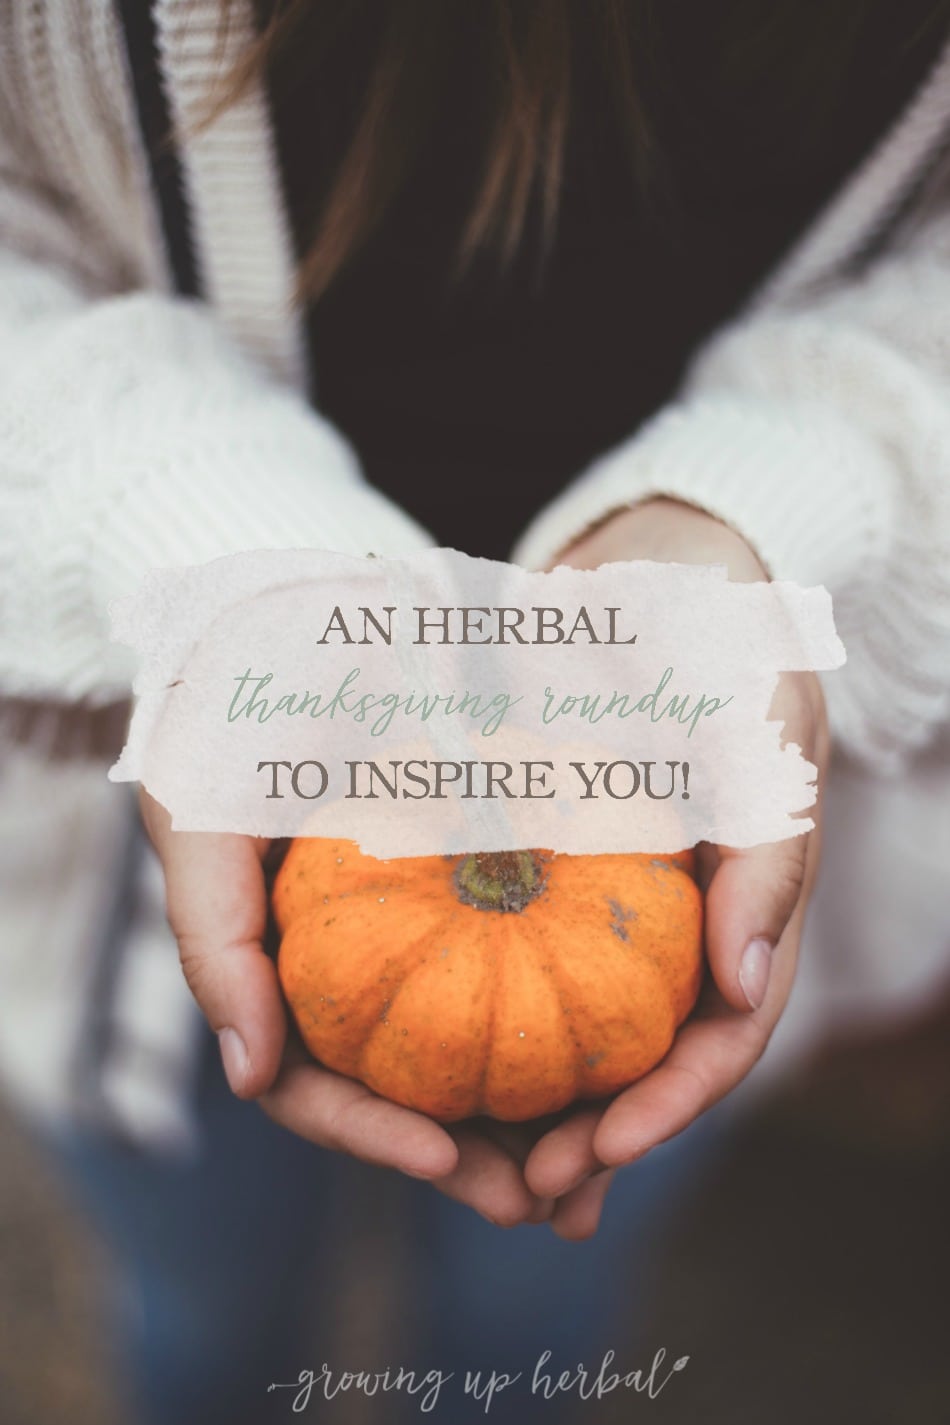 An Herbal Thanksgiving Roundup To Inspire You | Growing Up Herbal | Herbs are easy to incorporate into your autumn festivities from food to drinks to table decor and gifts. Here are some ideas to inspire you this season!